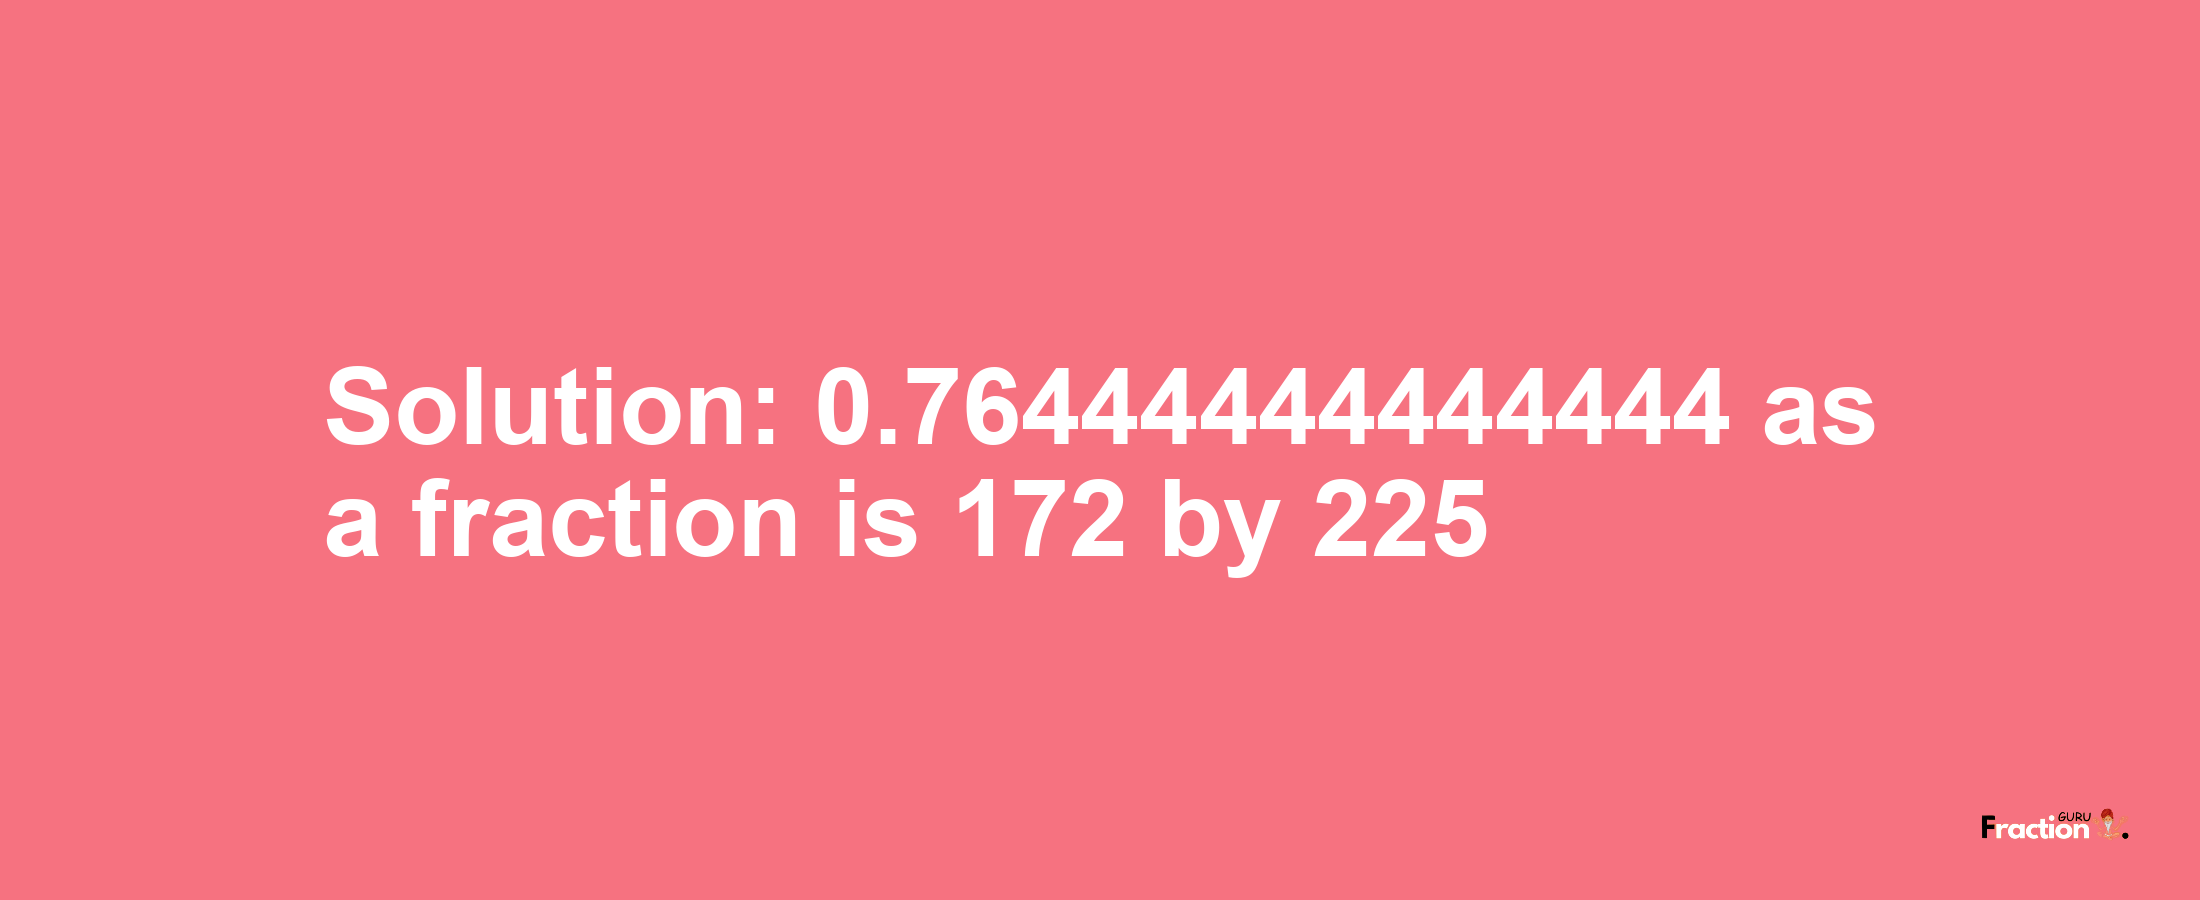 Solution:0.76444444444444 as a fraction is 172/225